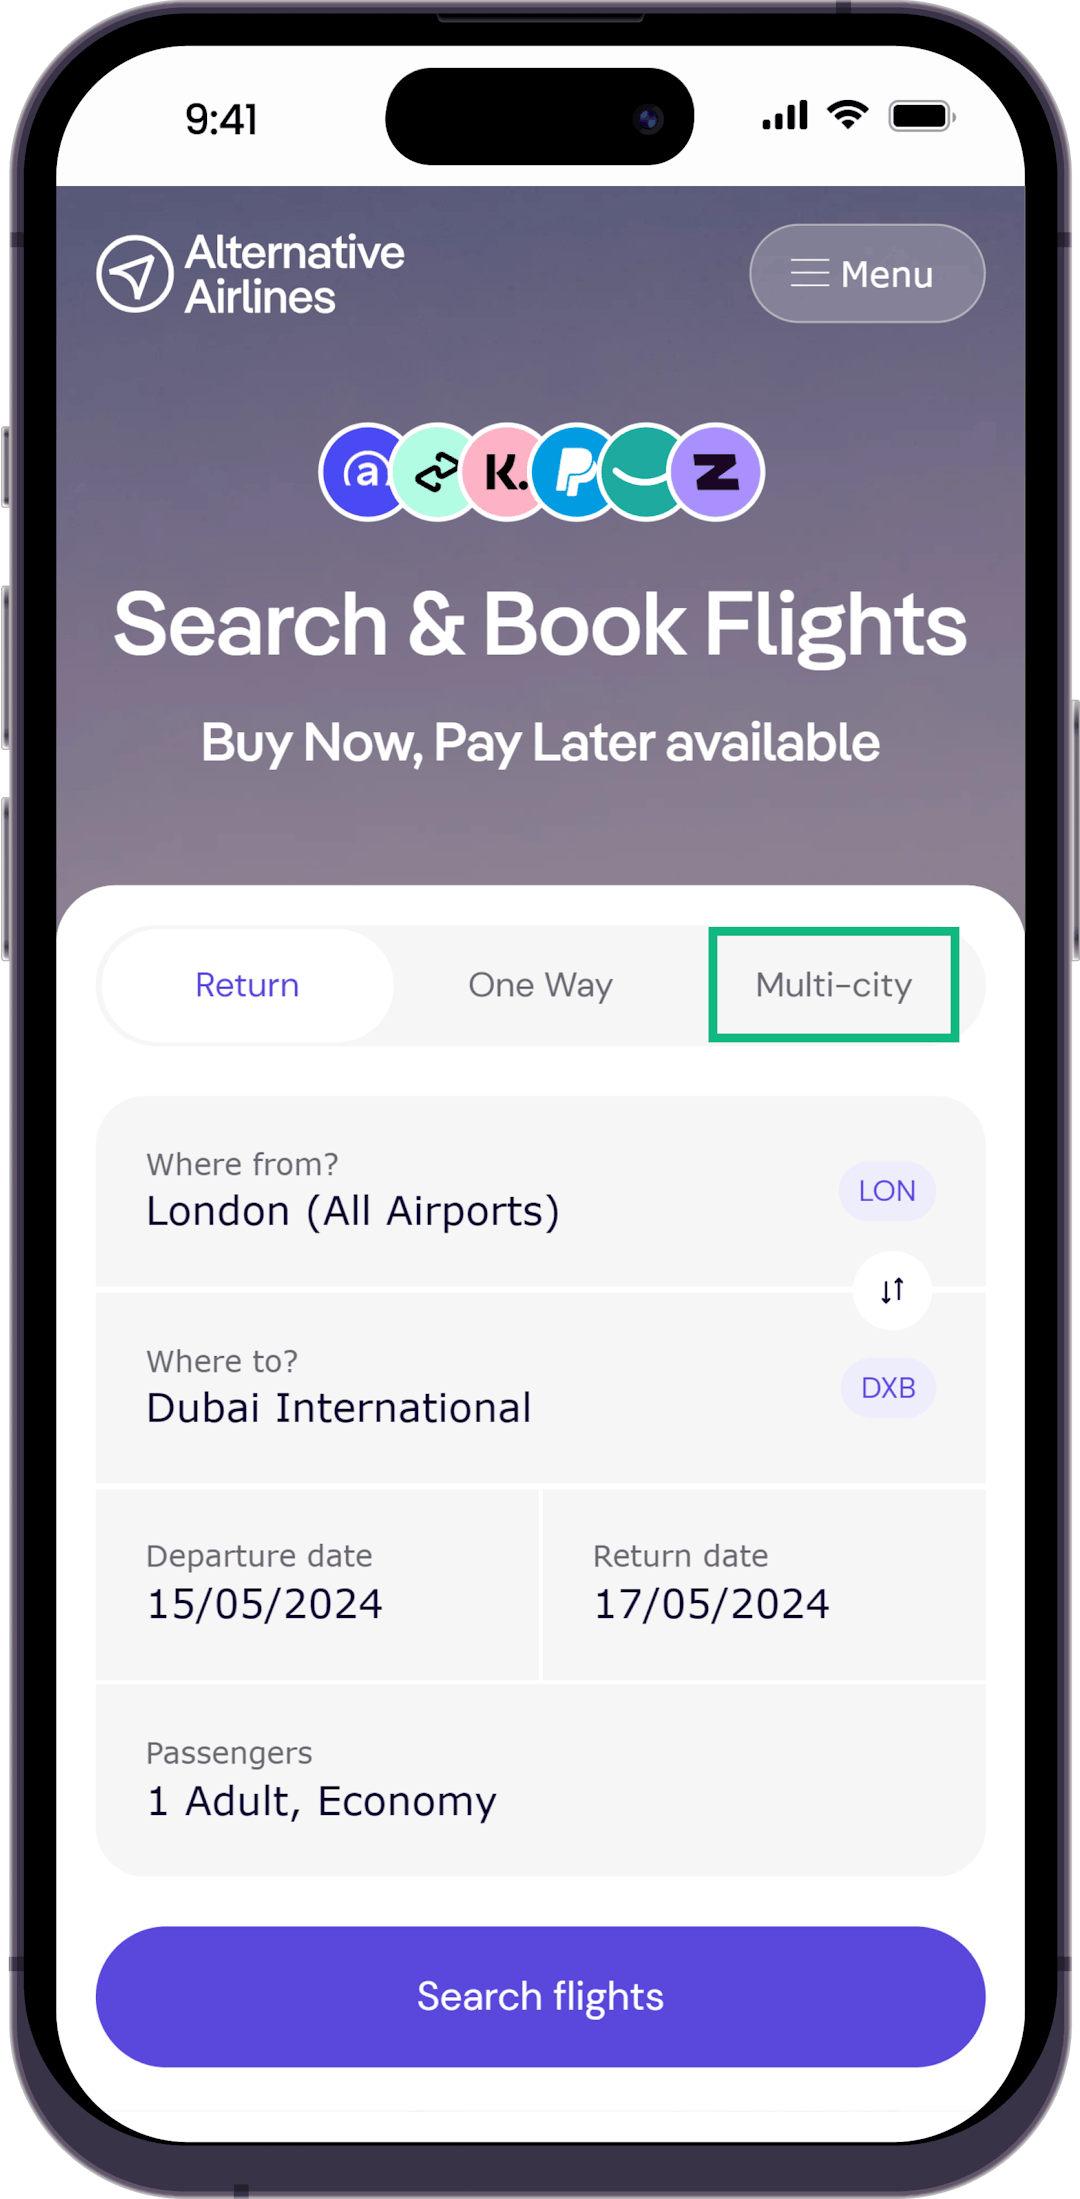 Step 1 - Select multi-city option in search form